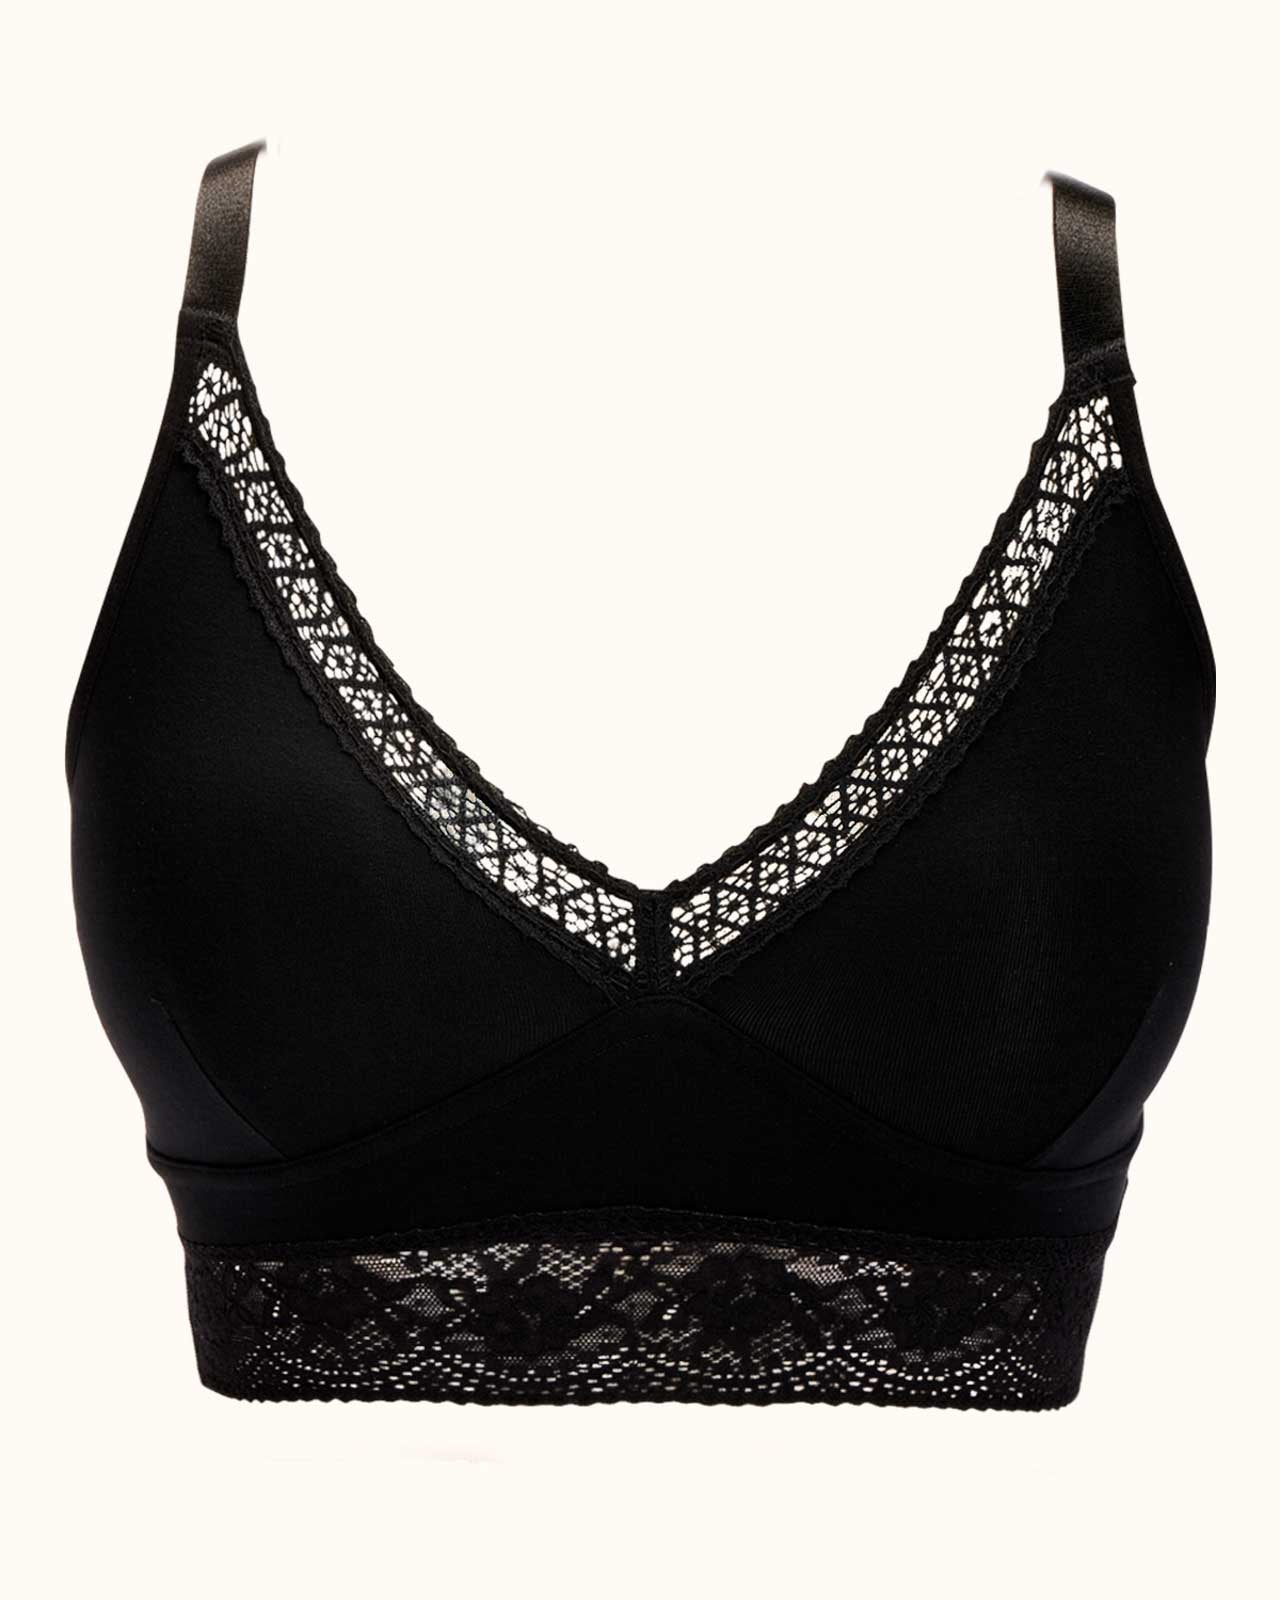 Black, longline pullover bra with a lace trim, soft cups, mesh back, adjustable straps. 